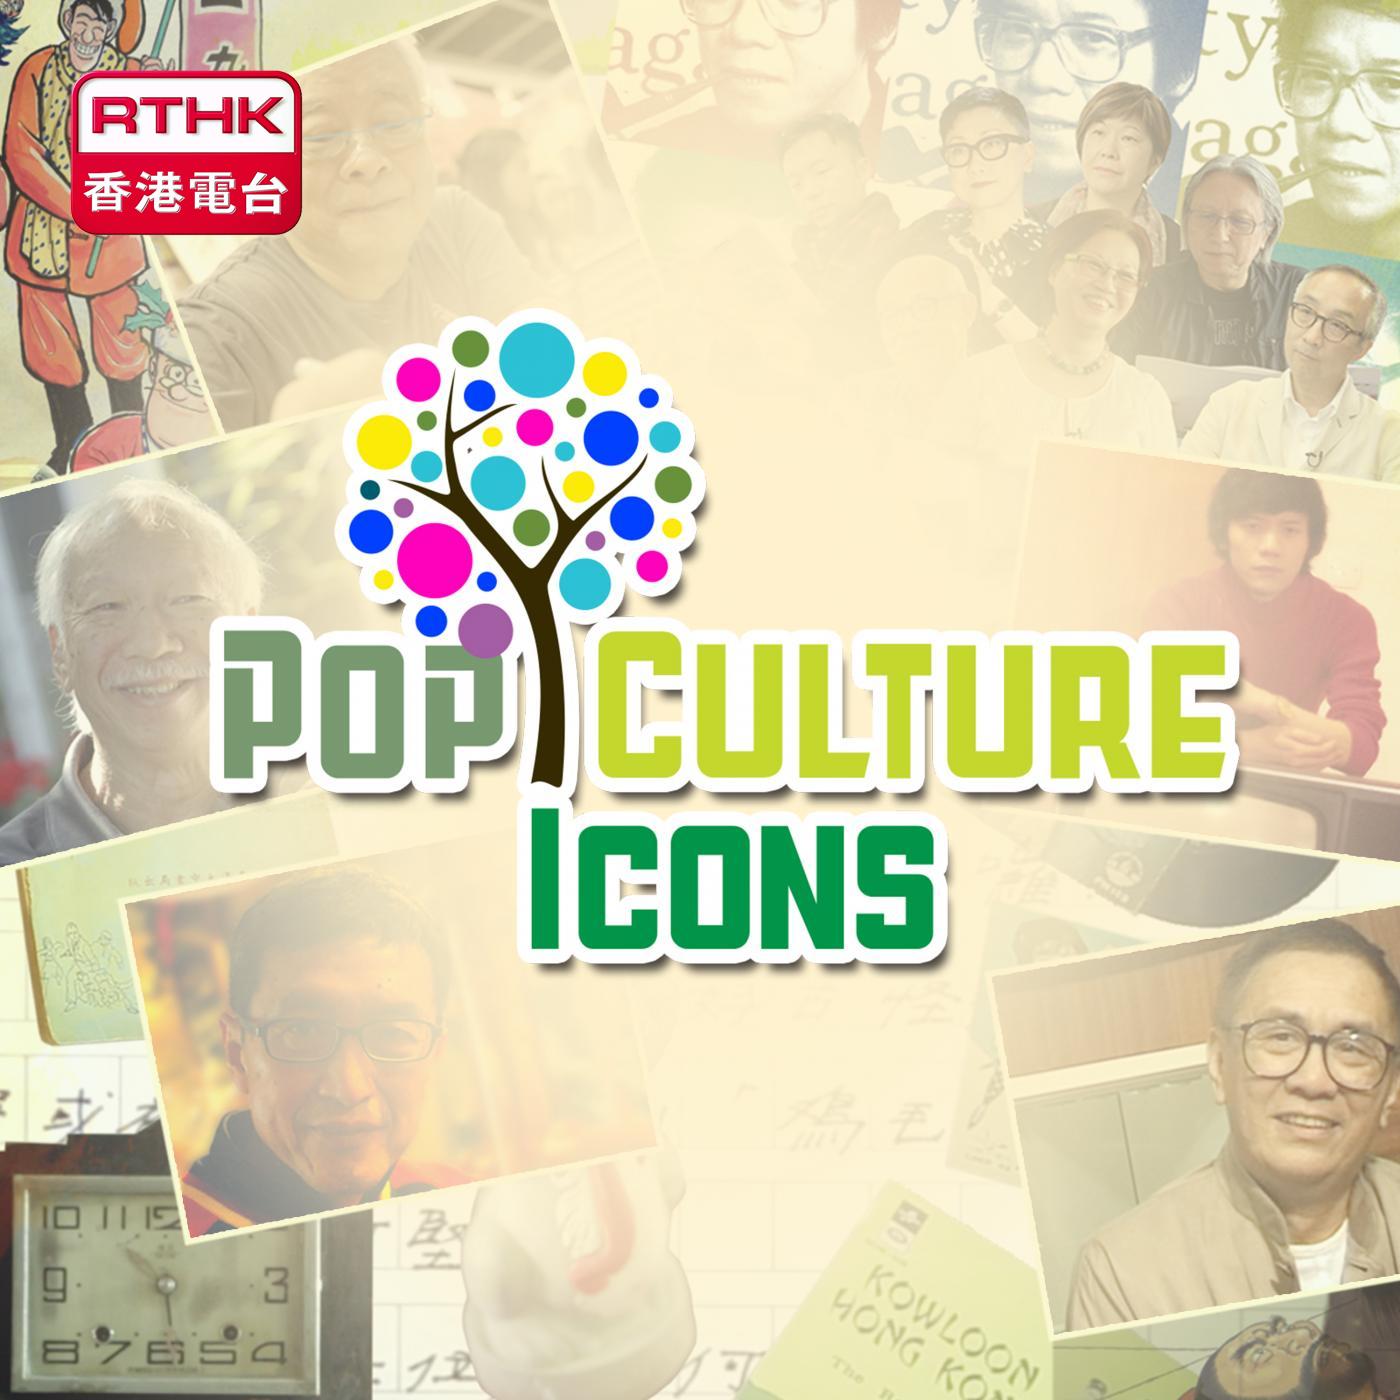 Pop Culture Icons 2016 English version